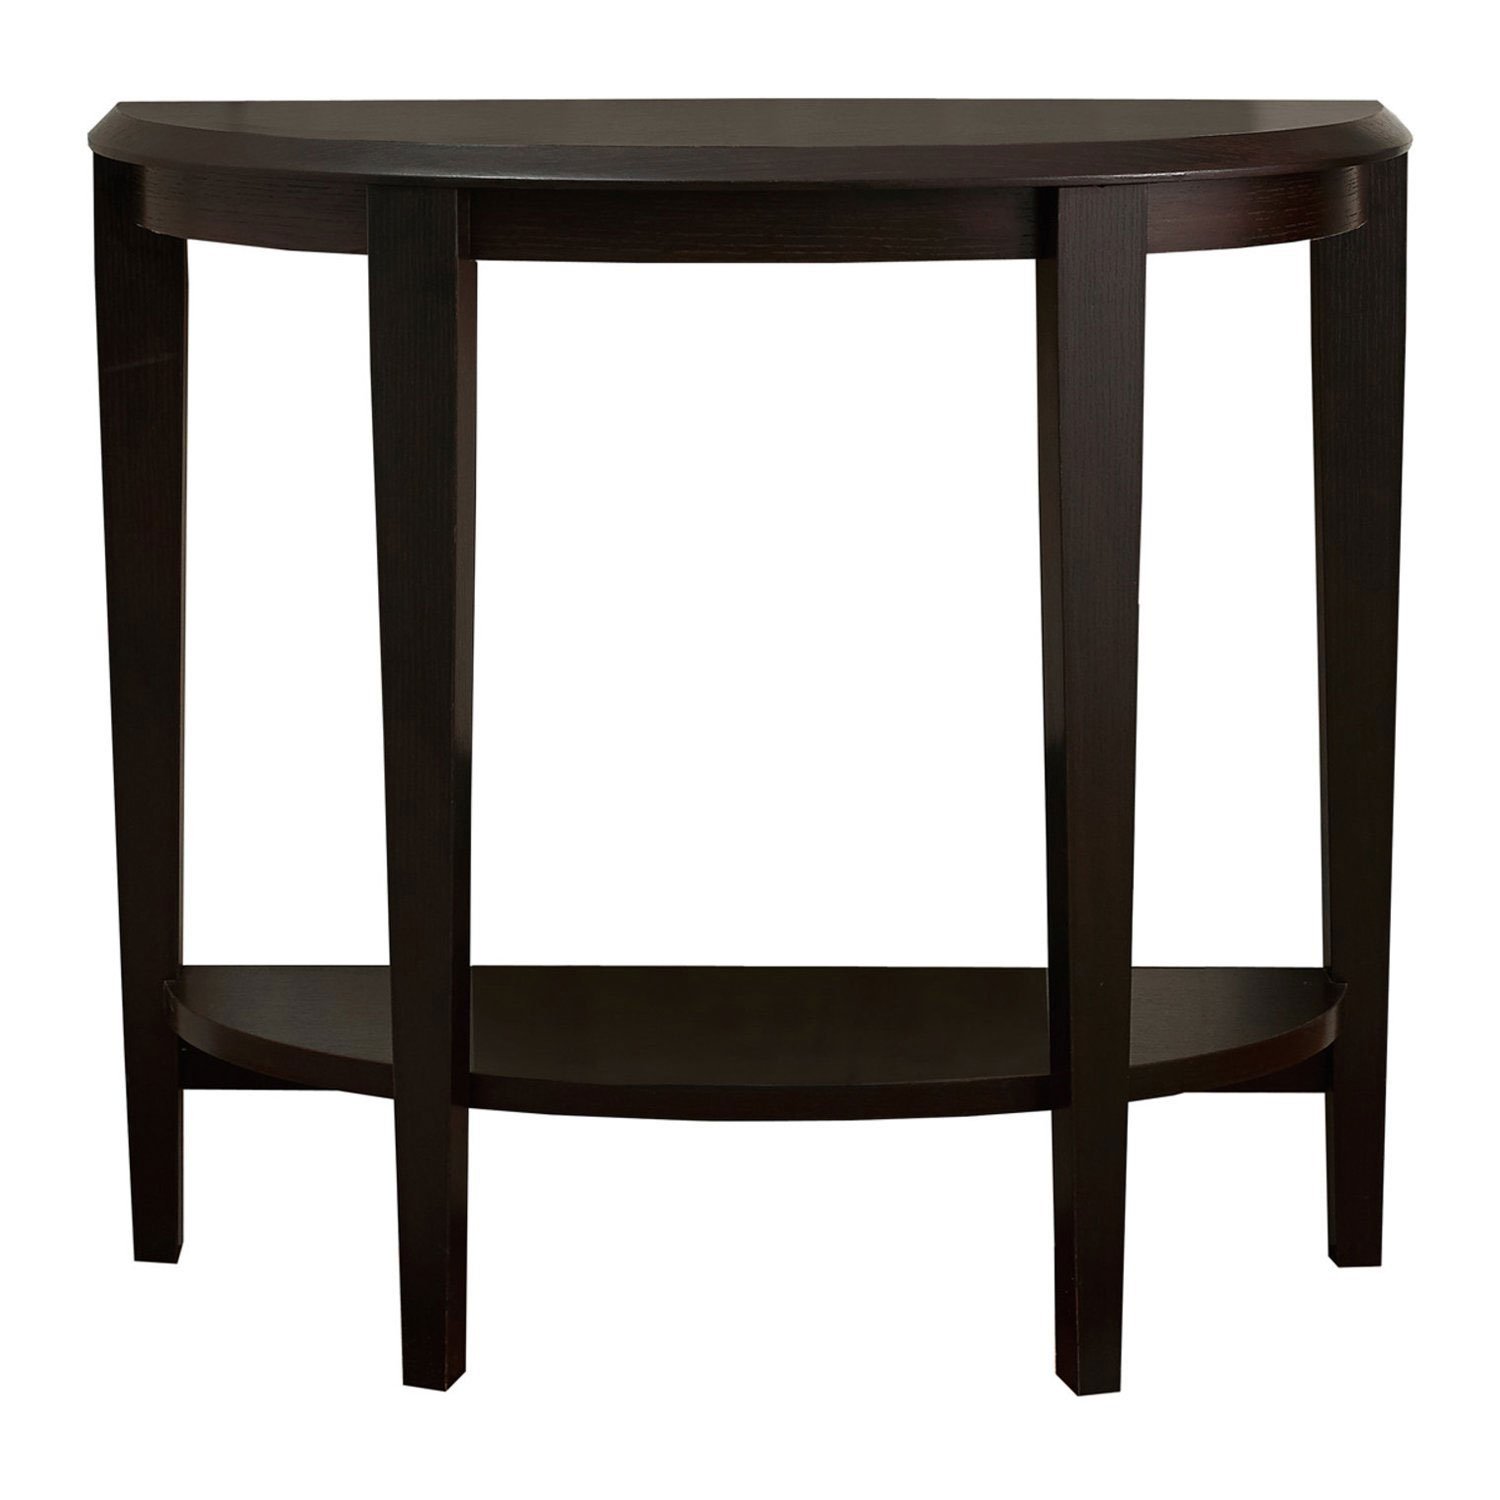 monarch accent table cappuccino hall console target cabinet coral decorative accents replacement legs quatrefoil coffee black and gray end tables commercial patio furniture mosaic